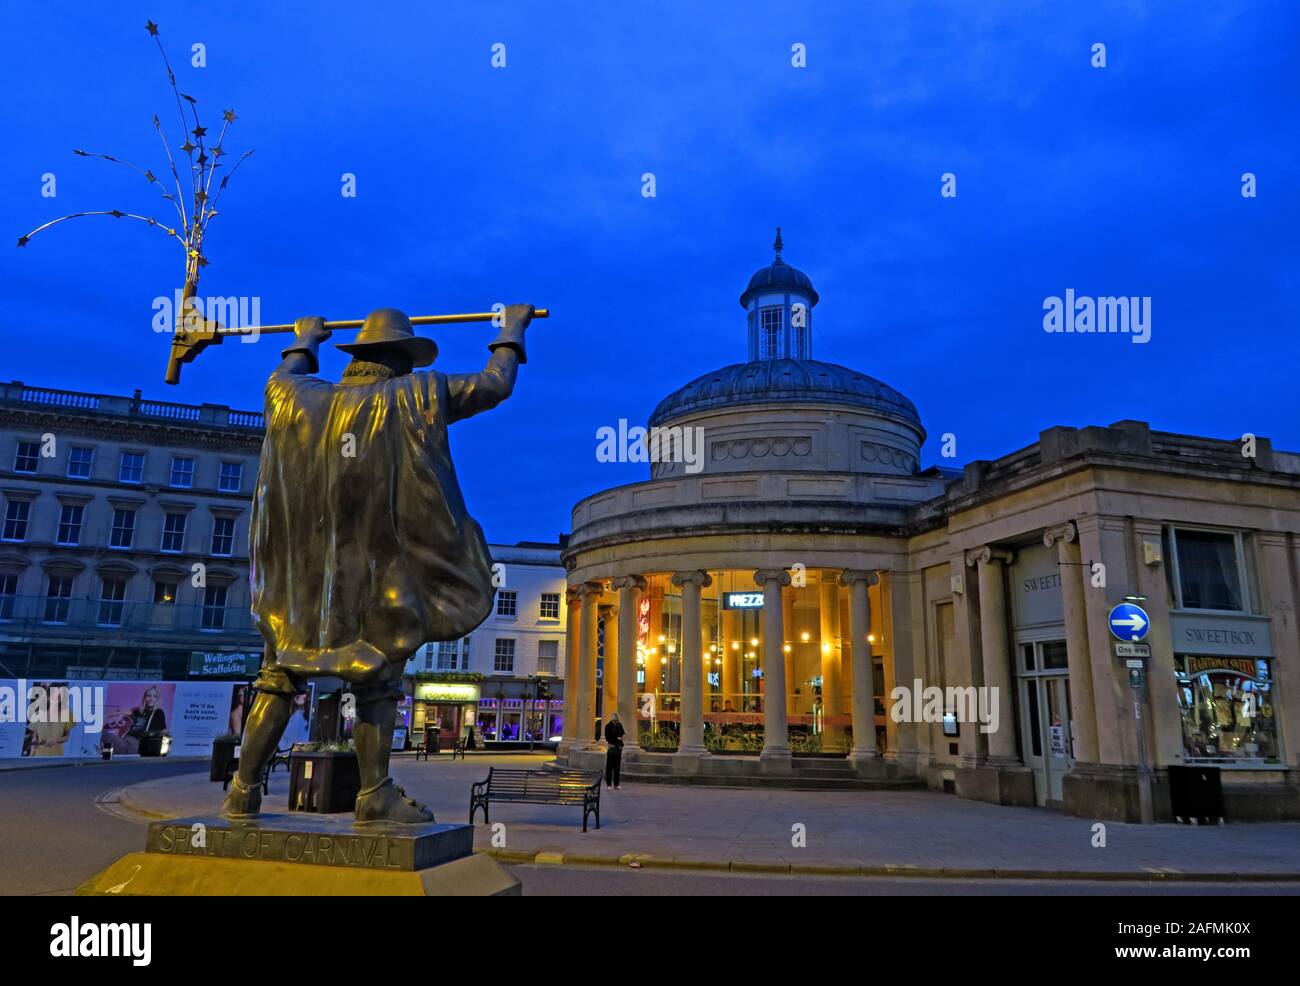 The Spirit of Carnival statue and old marketplace, Bridgwater Town Centre, Sedgemoor District Council, Somerset ,South West England, UK Stock Photo